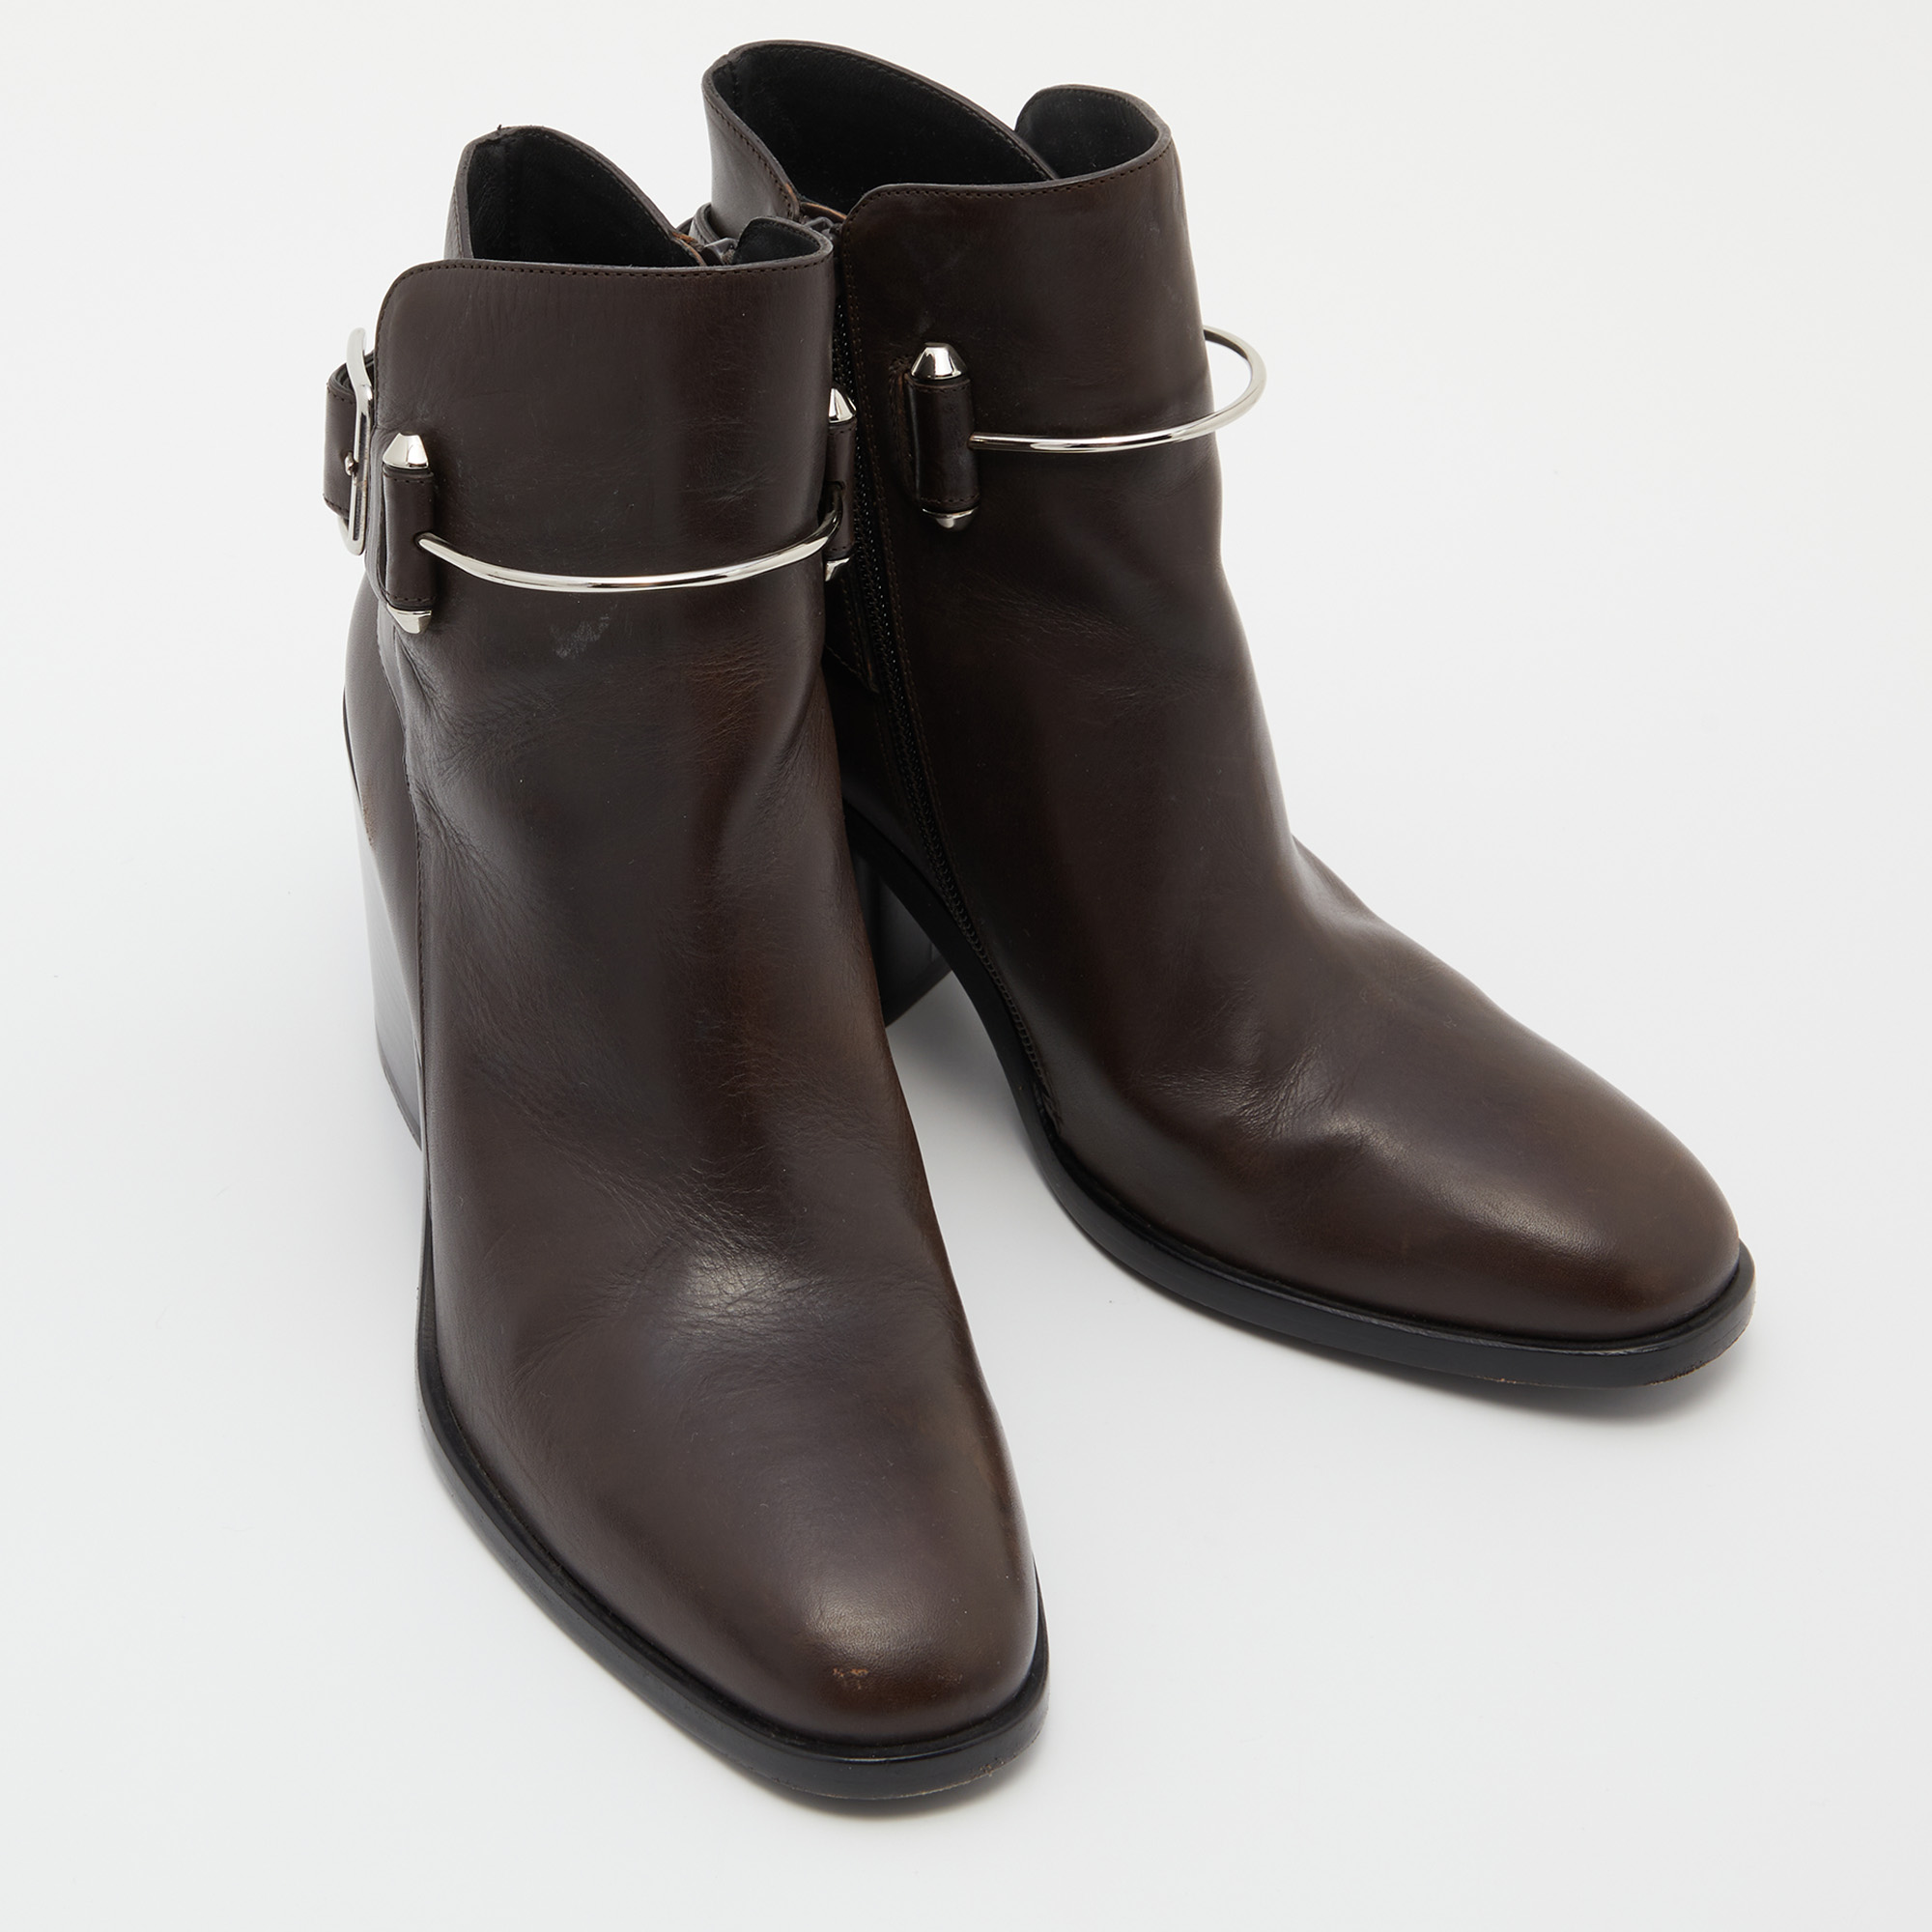 Balenciaga Brown Leather Ankle Boots Size 40